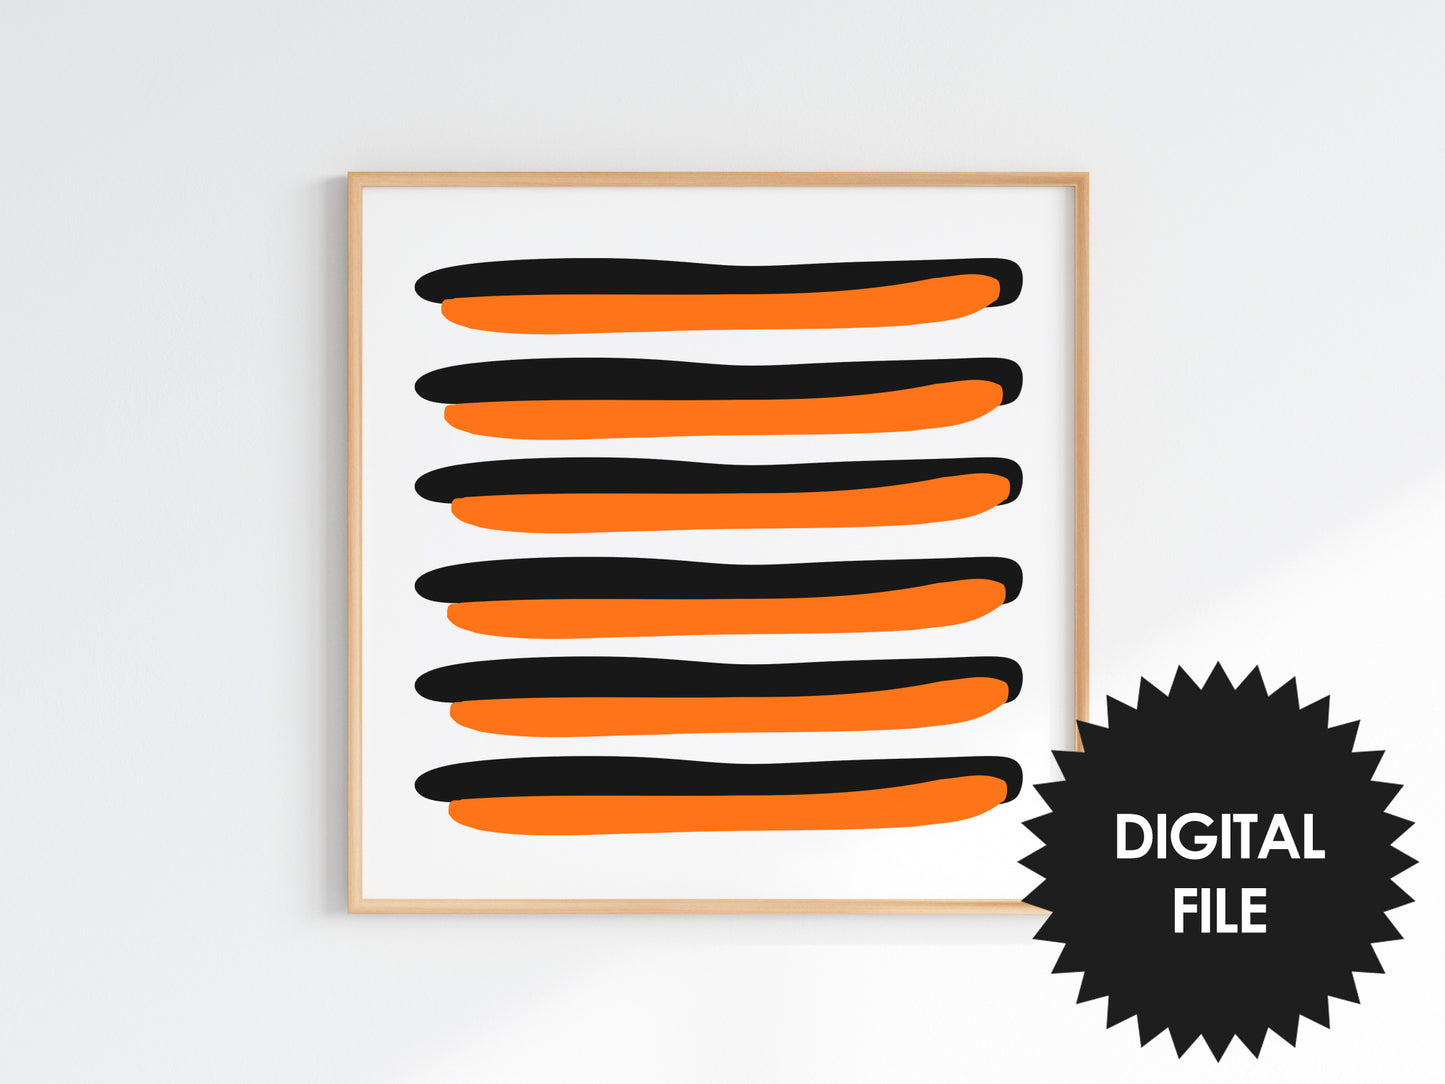 Halloween Inspired Abstract Wall Art Printable, Digital Download, Print at Home, Print Any Size Up To 20x20inch